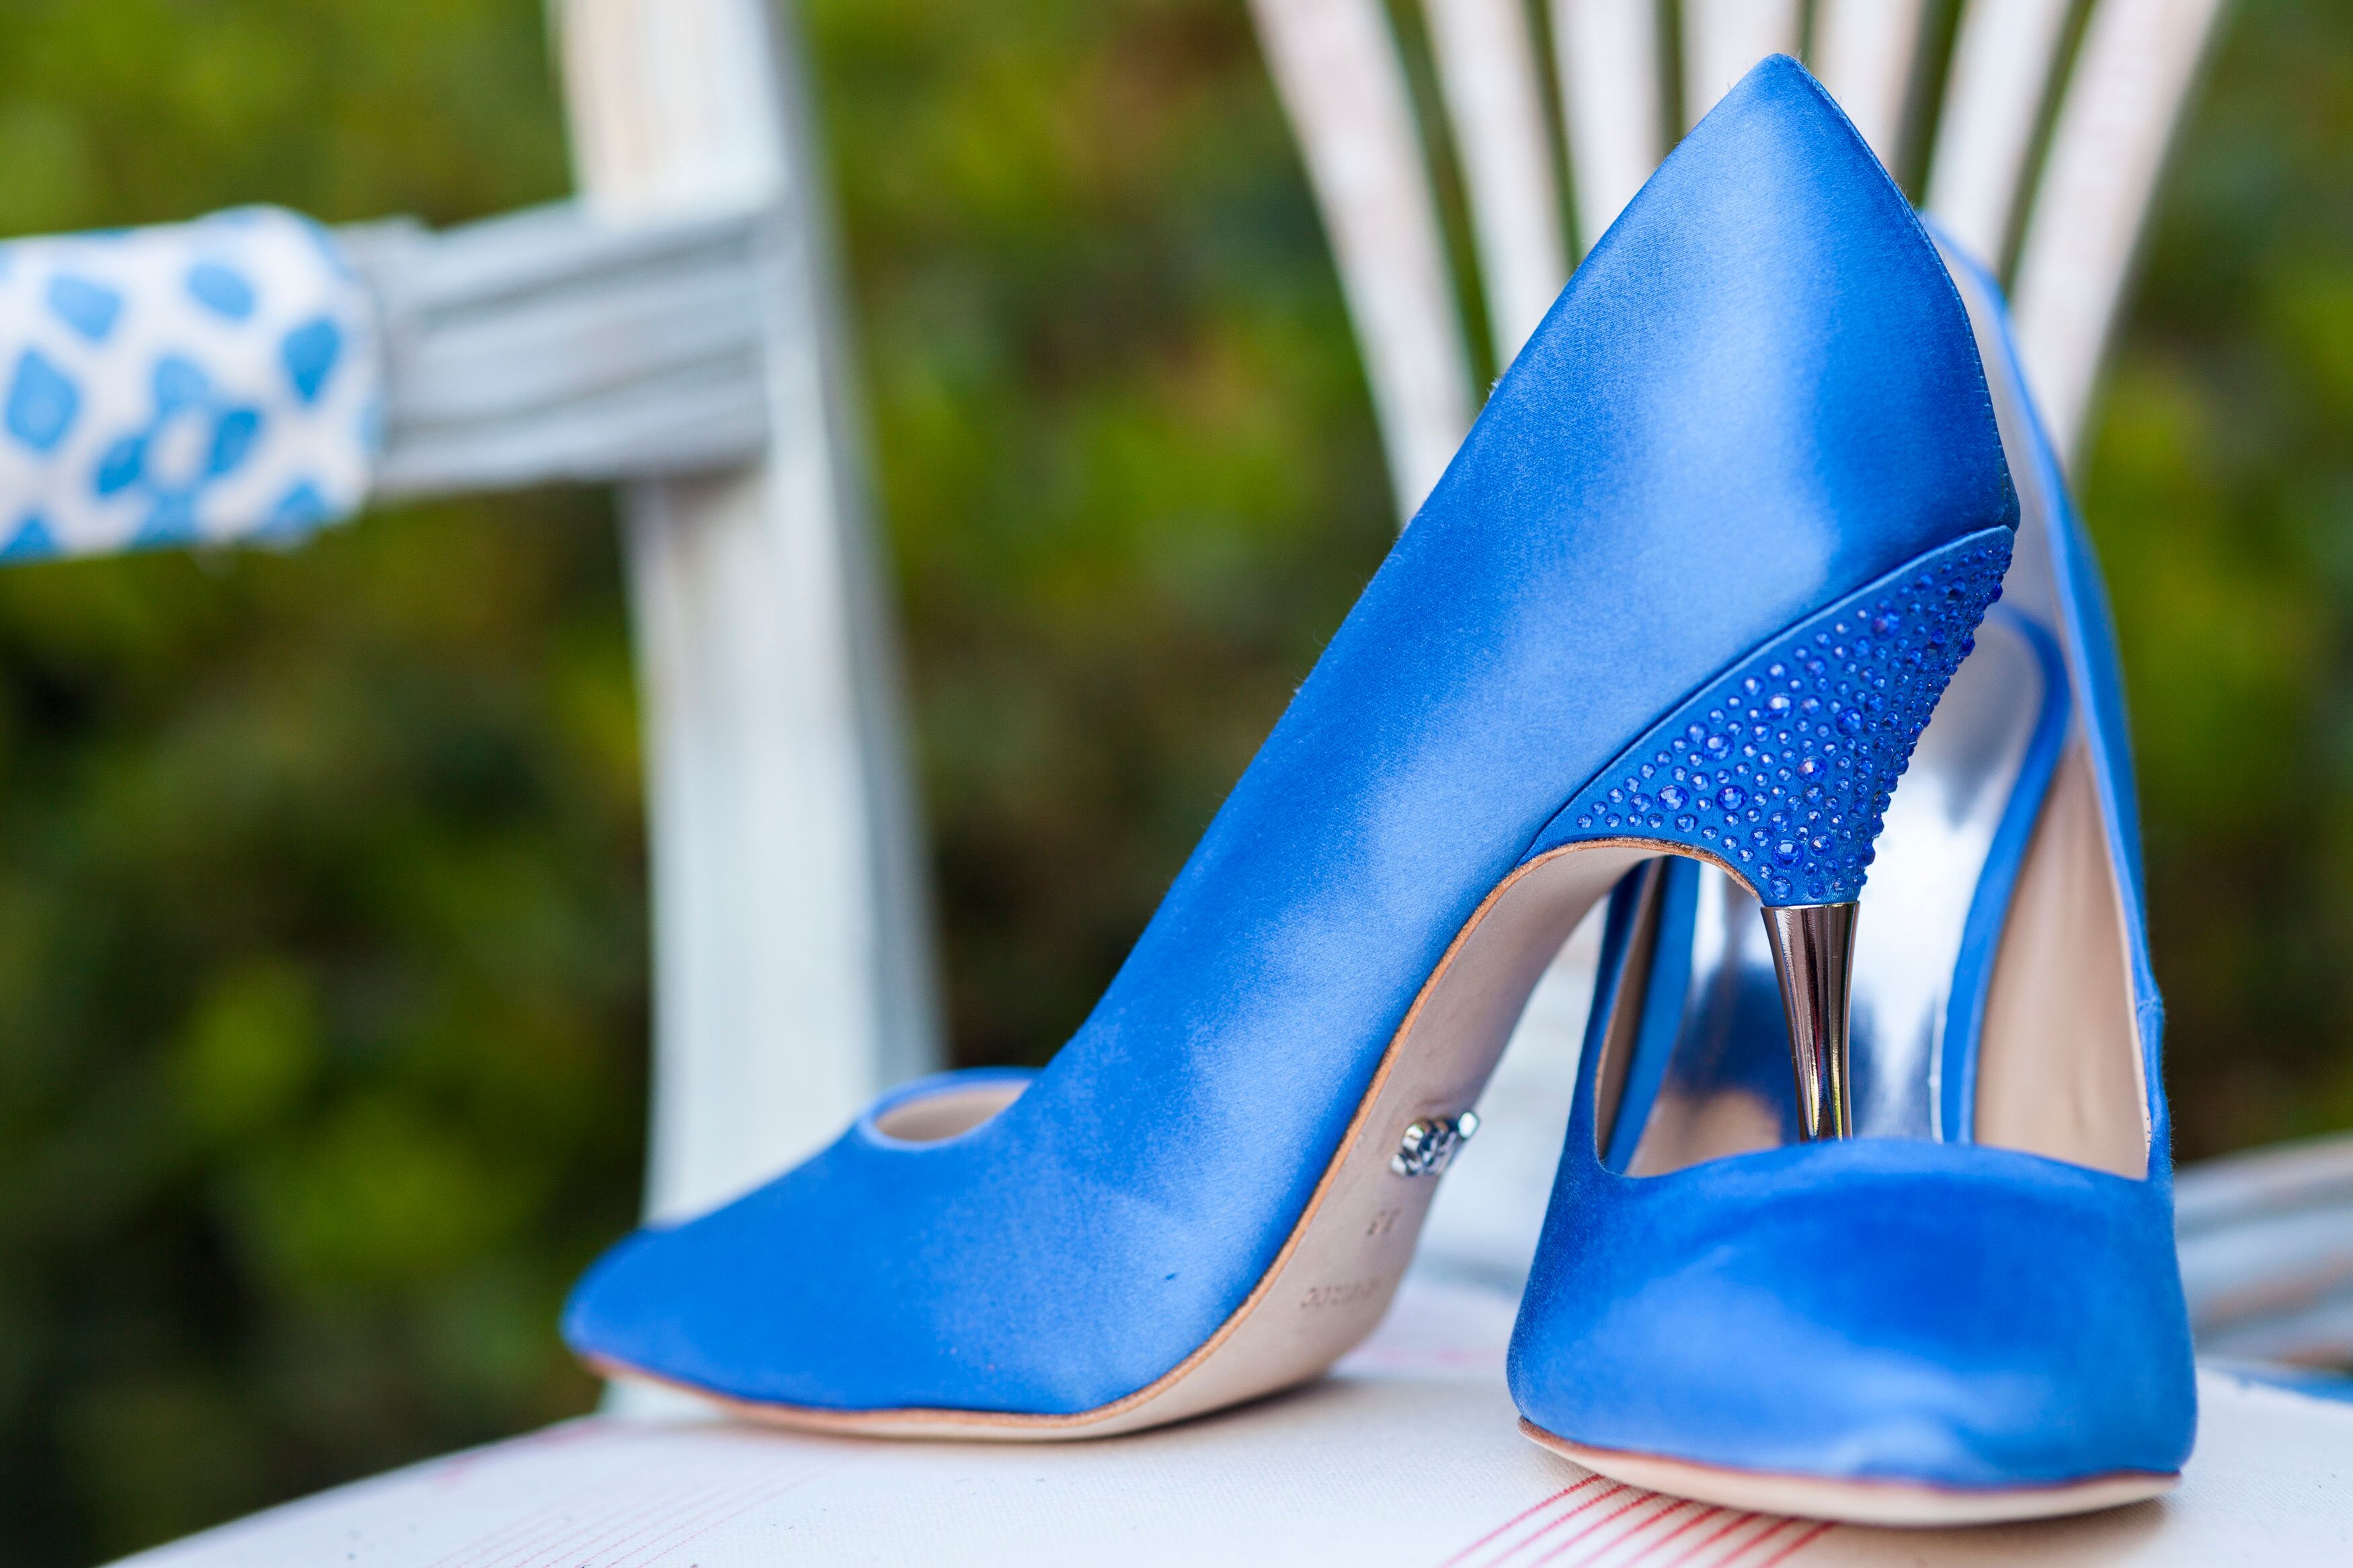 Royal Blue Bridal Shoes on Chair